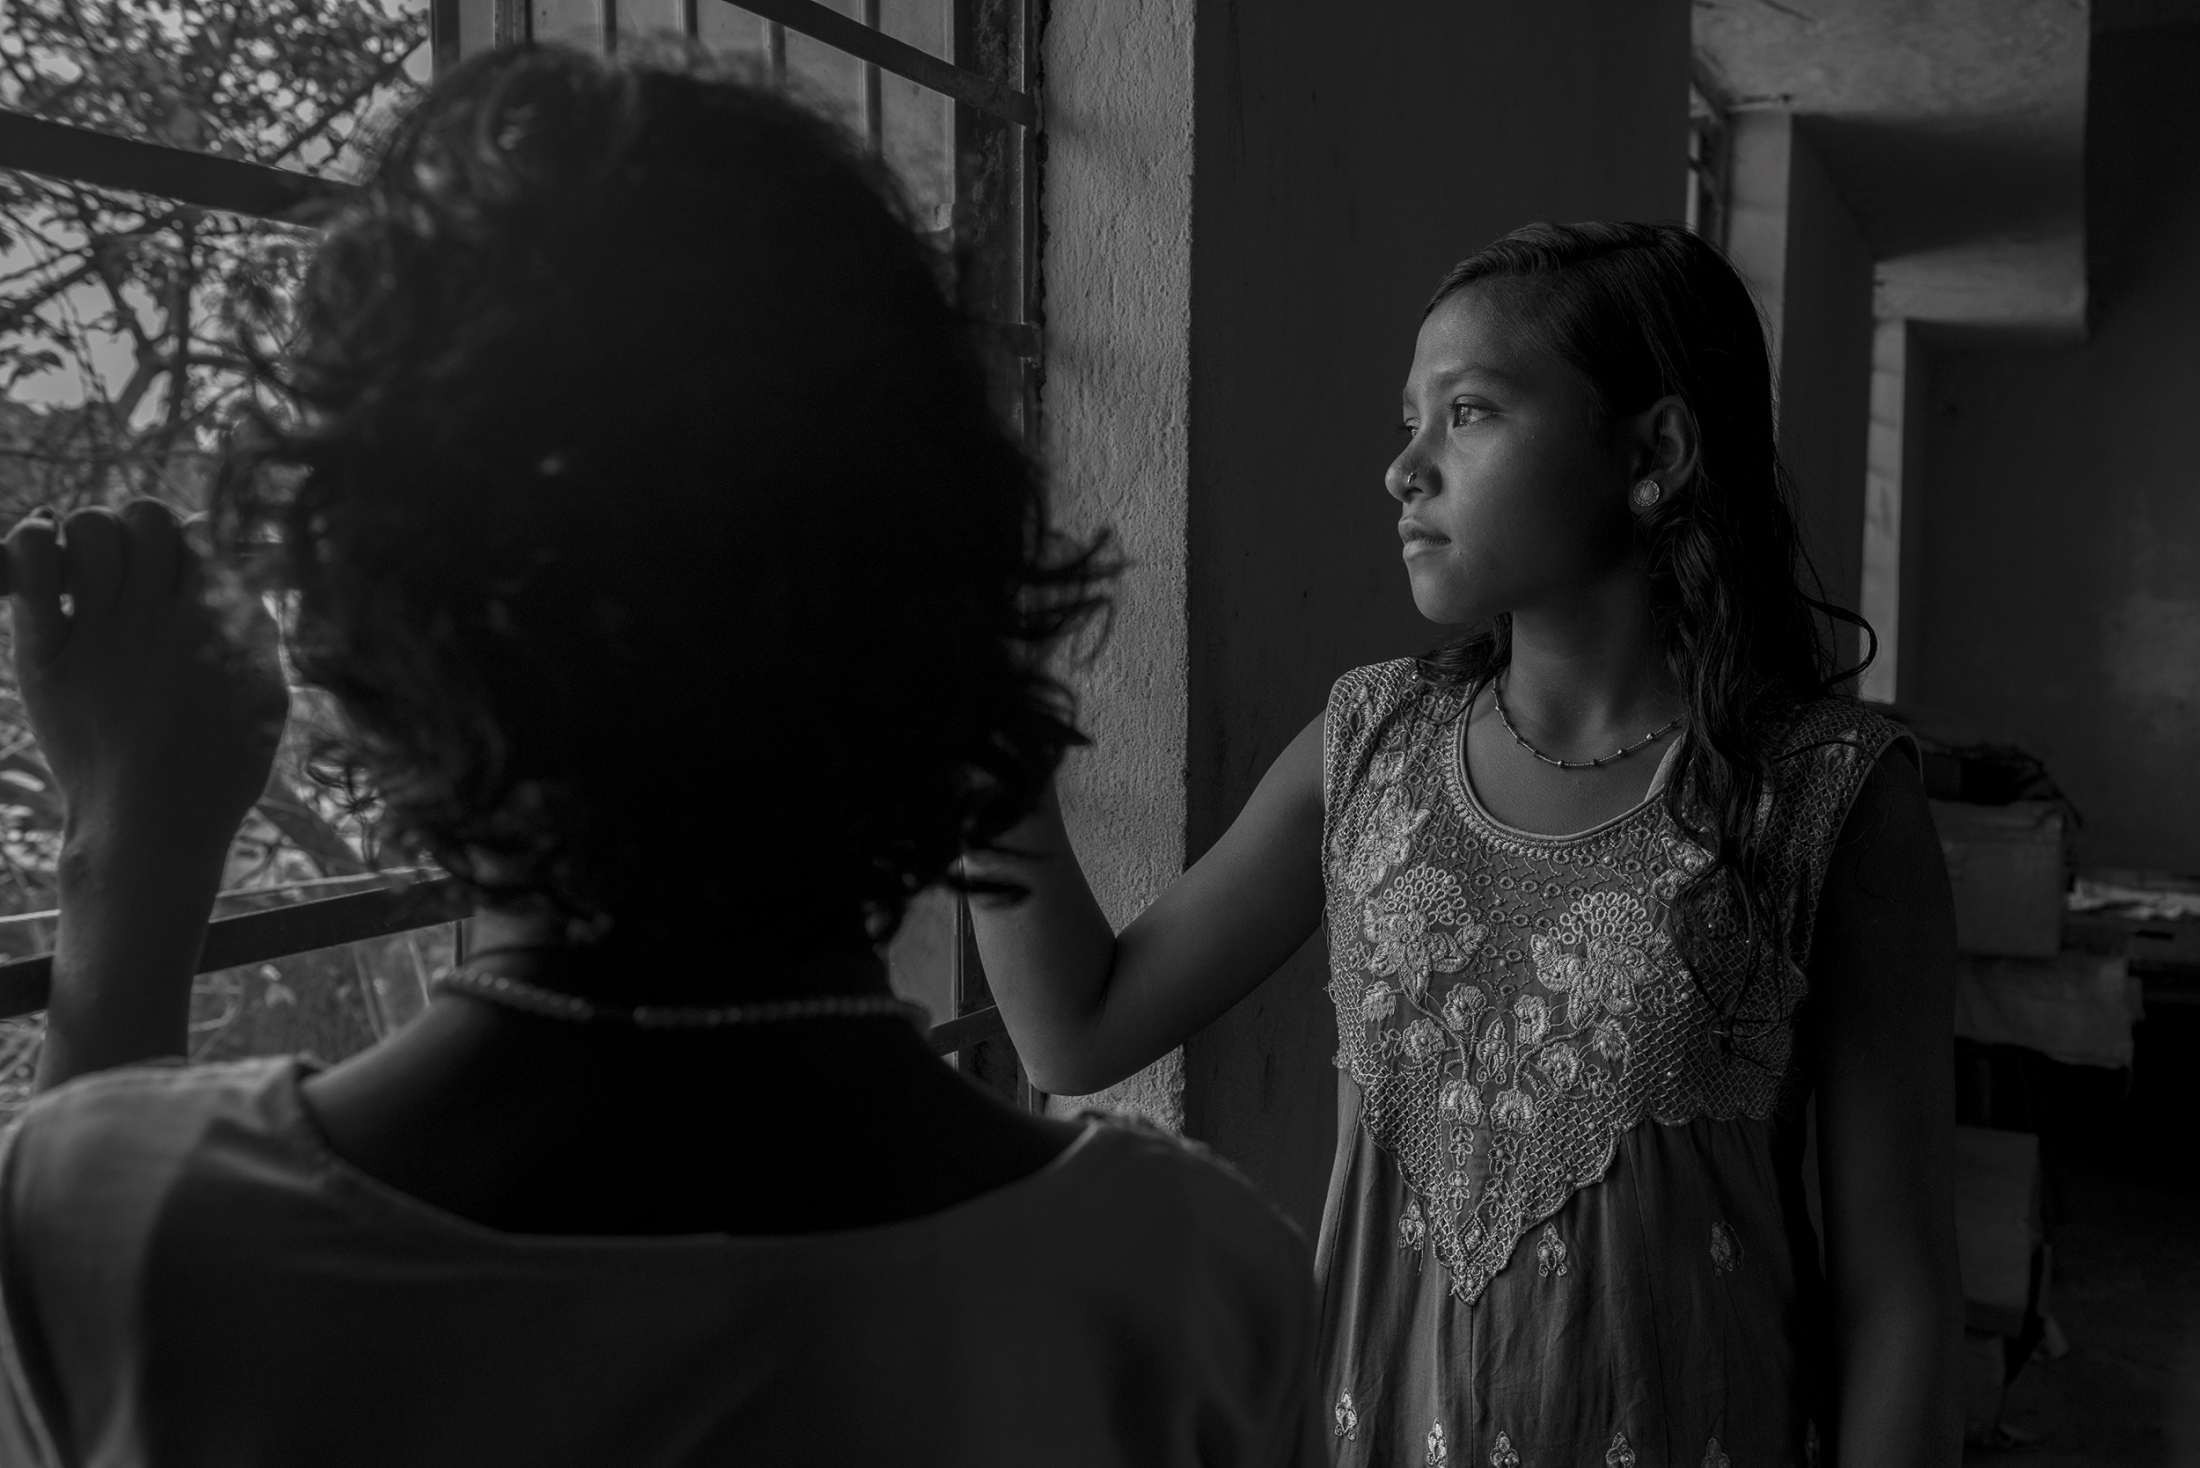 The Boarding School Saves Young Girls from Intergenerational Prostitution - Bihar, India -  "India’s Last Girl First" this is a...